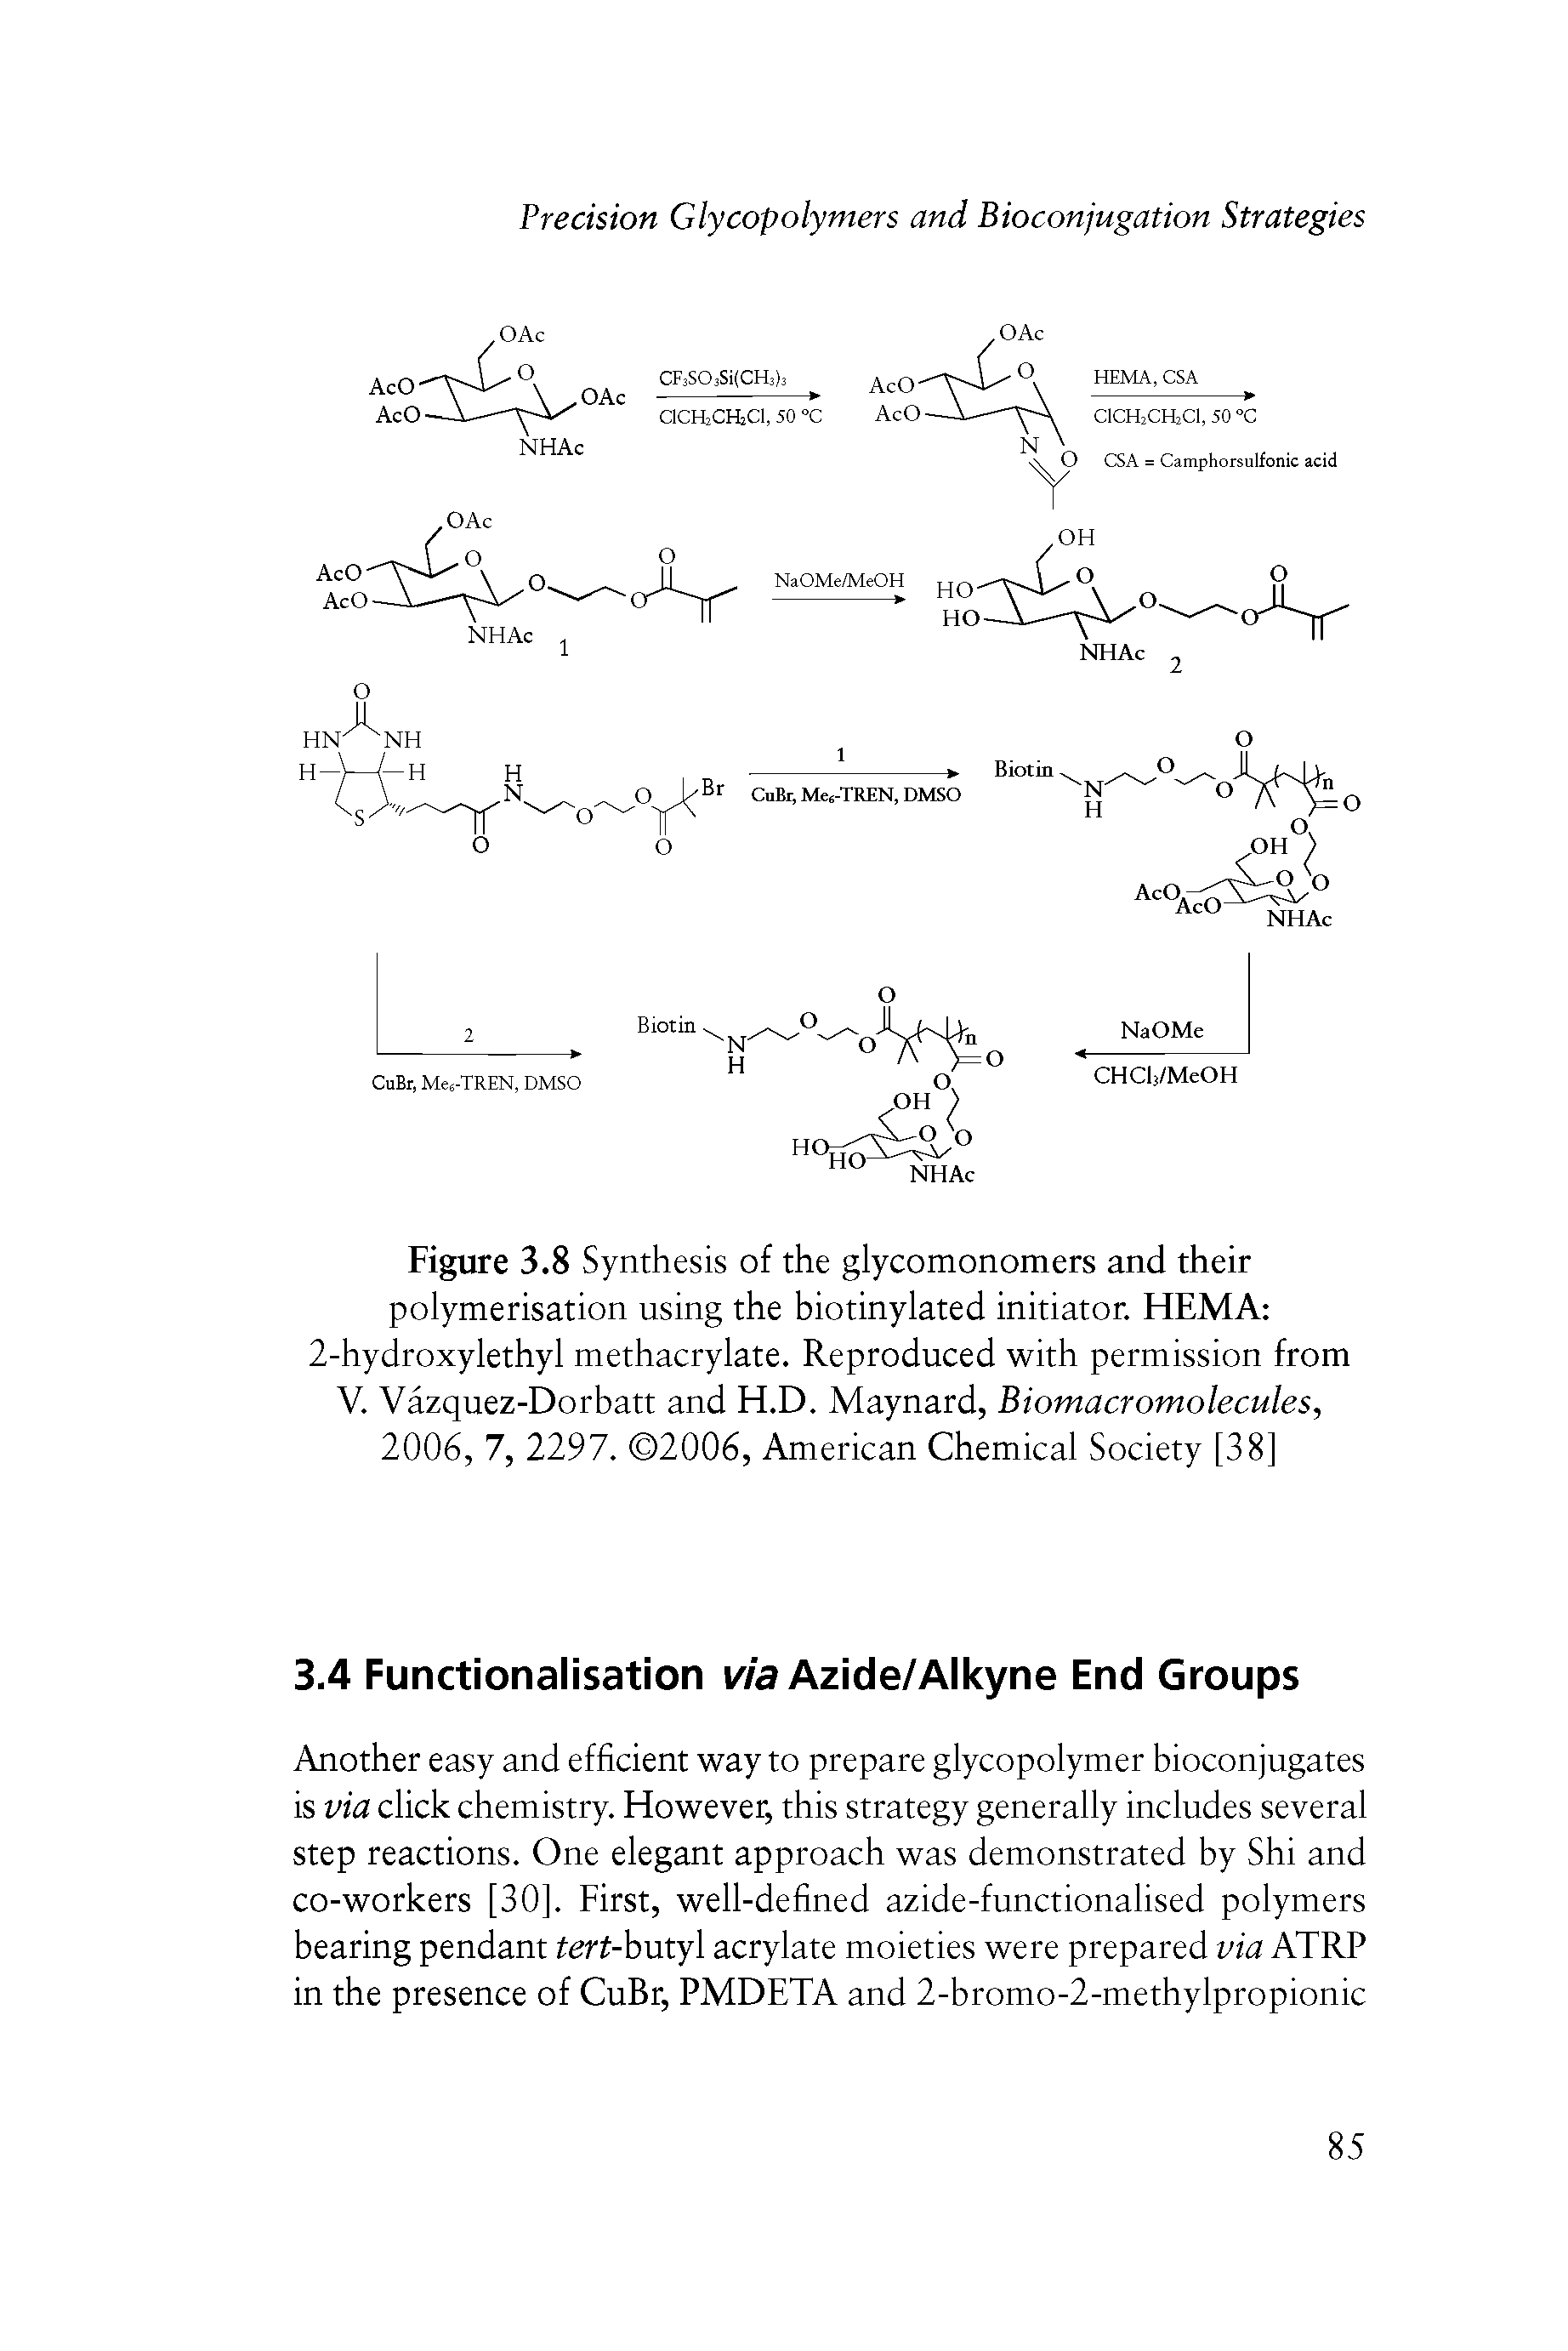 Figure 3.8 Synthesis of the glycomonomers and their polymerisation using the biotinylated initiator. HEMA 2-hydroxylethyl methacrylate. Reproduced with permission from V. Vazquez-Dorbatt and H.D. Maynard, Biomacromolecules, 2006,1, 2297. 2006, American Chemical Society [38]...